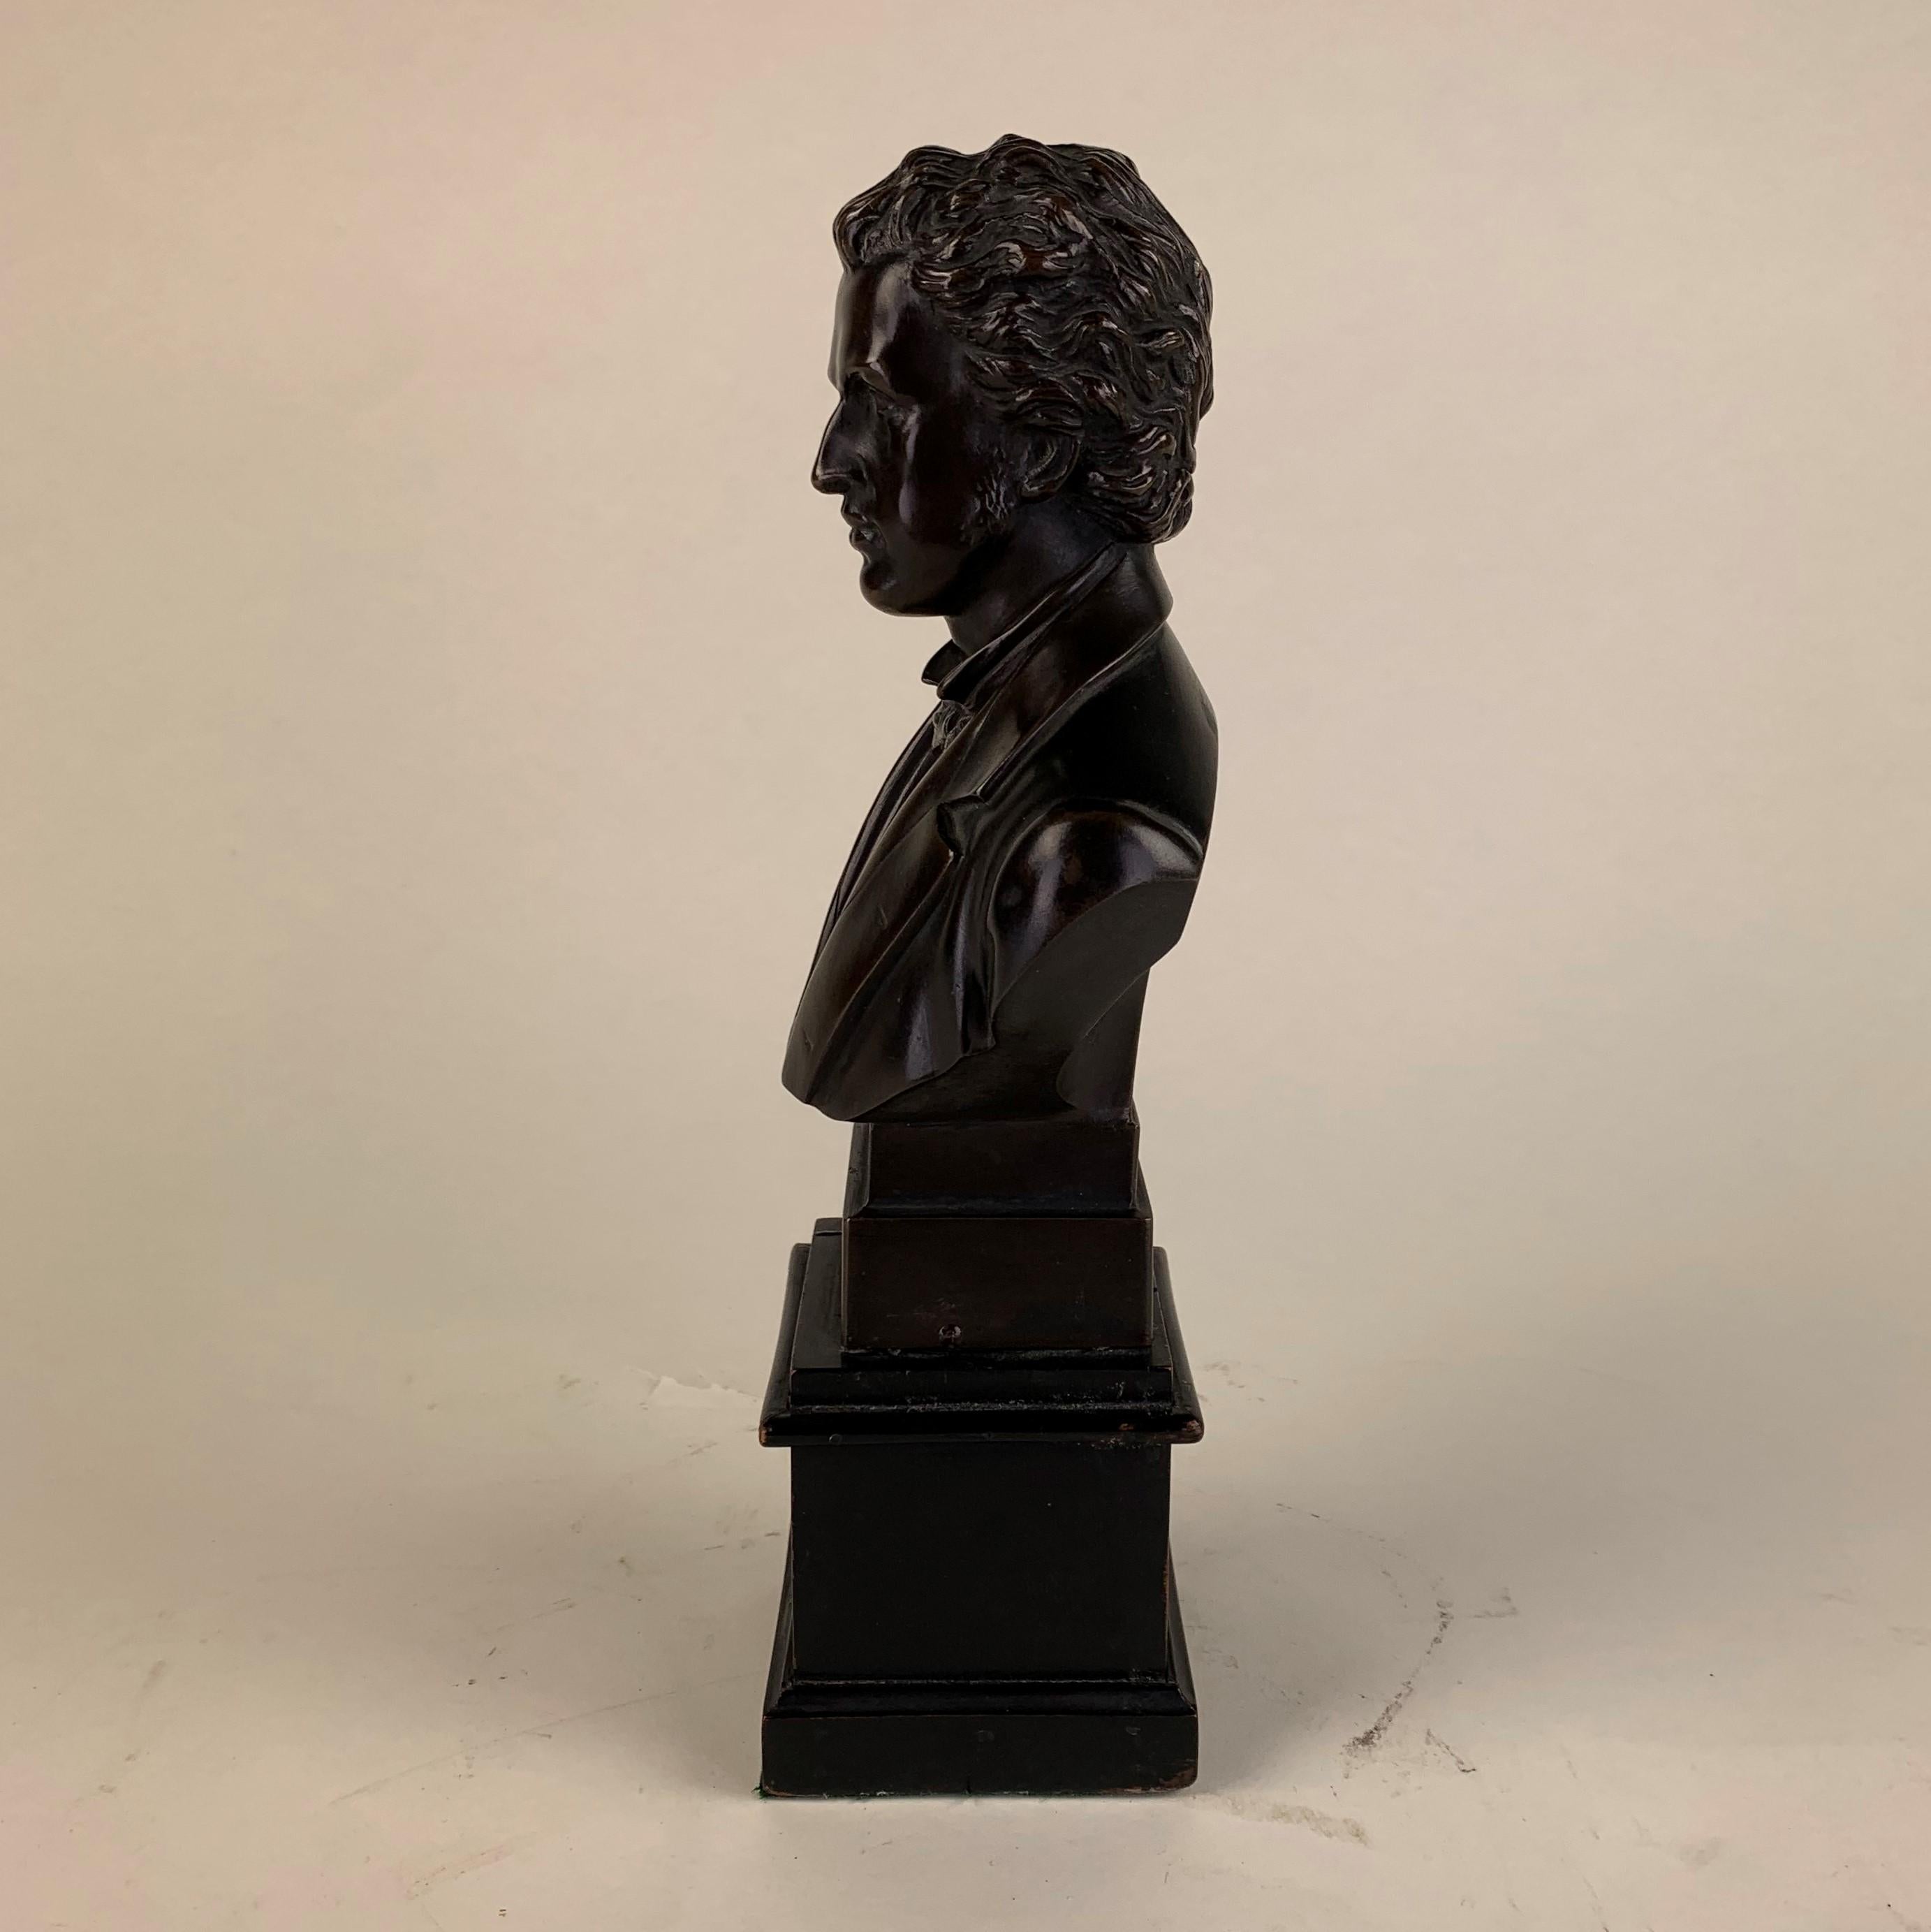 A good quality patinated bronze bust of Chopin rained on a square, stepped black wooden base. Well executed with good detail and rich brown patination.
Measures: (Base is 7cms by 7cms).